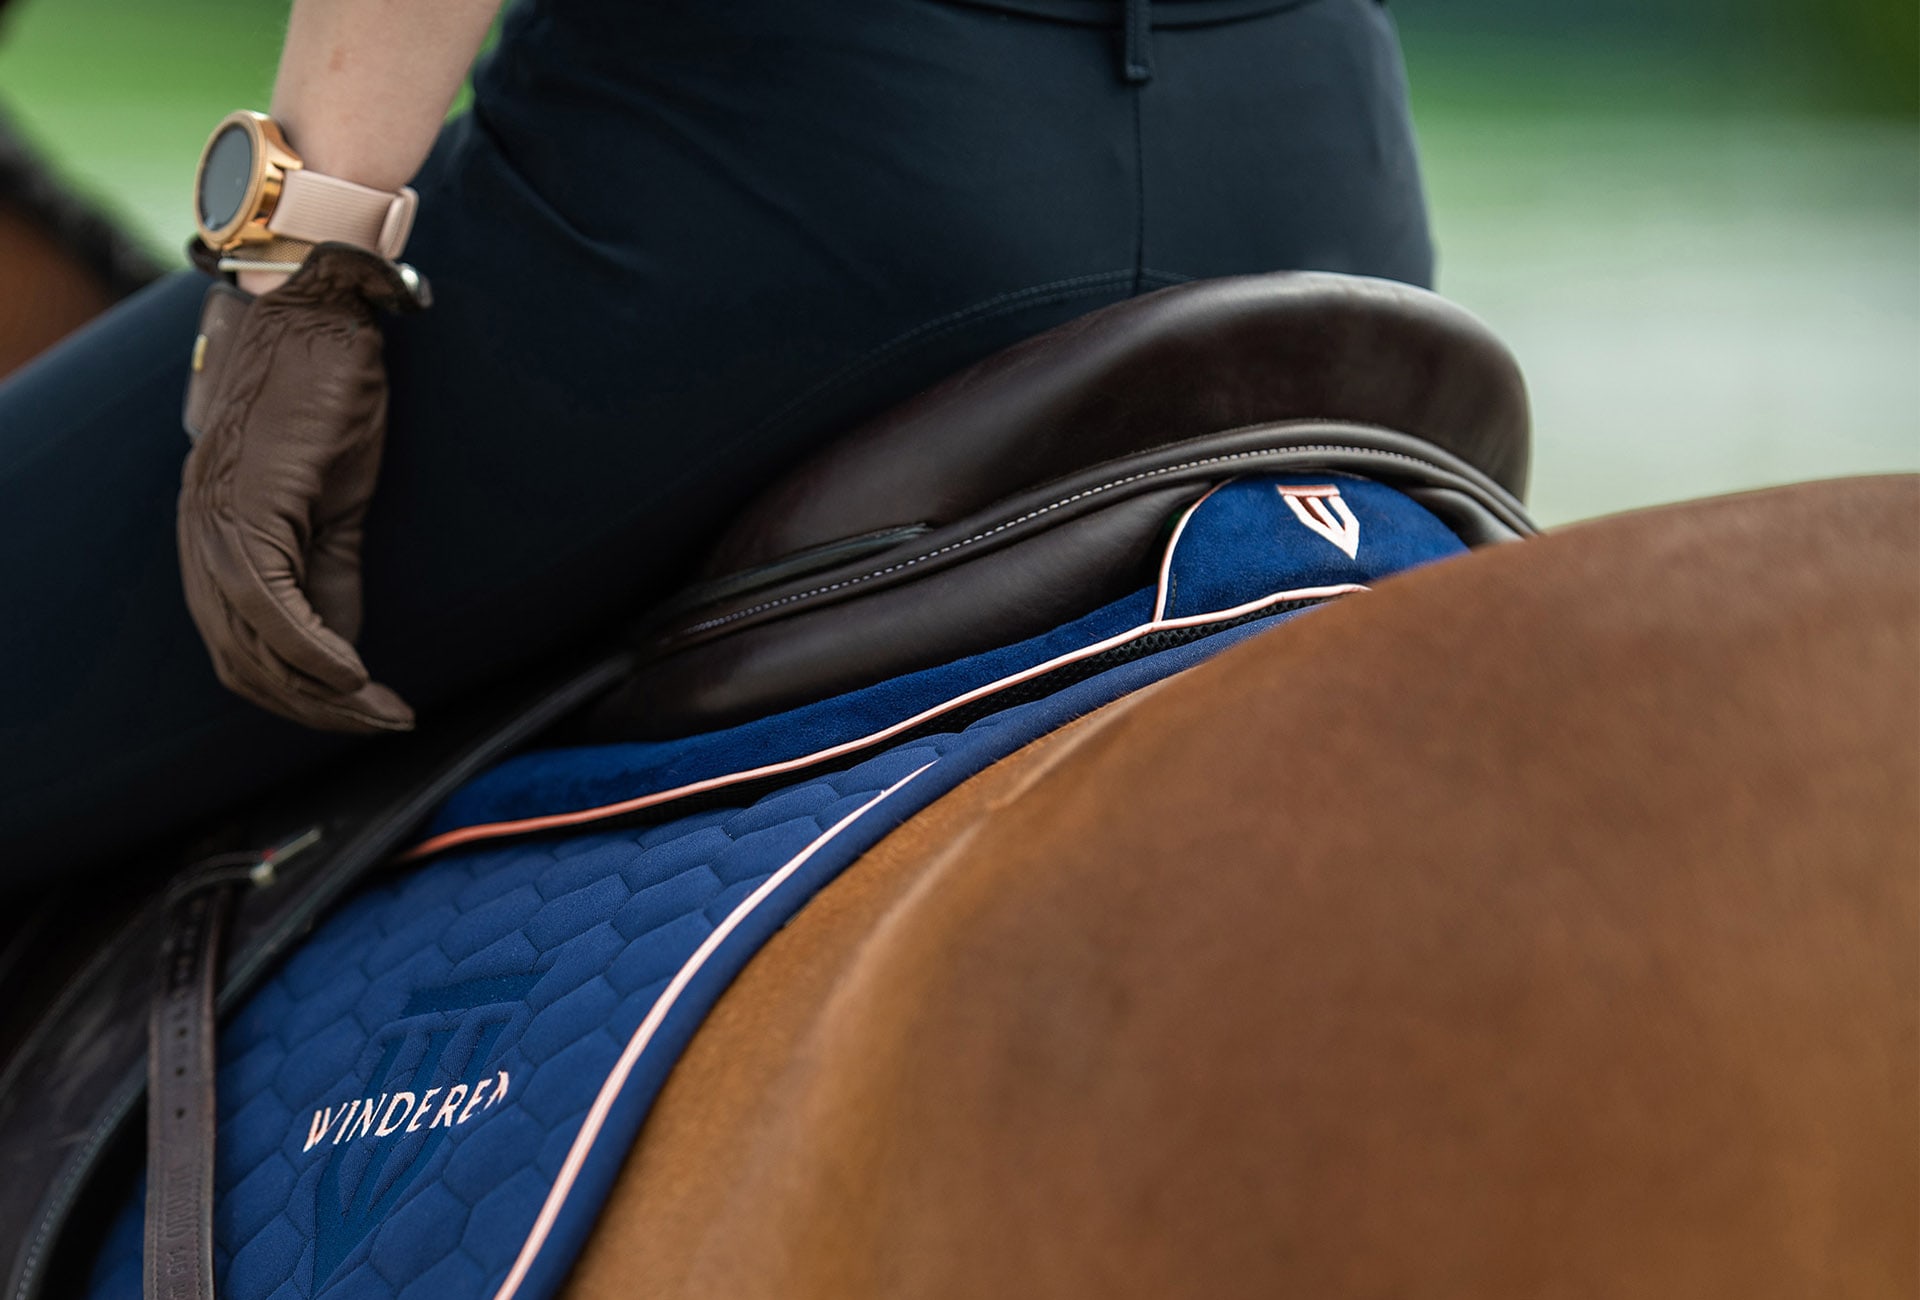 The best half pad for your horse - which model to choose?